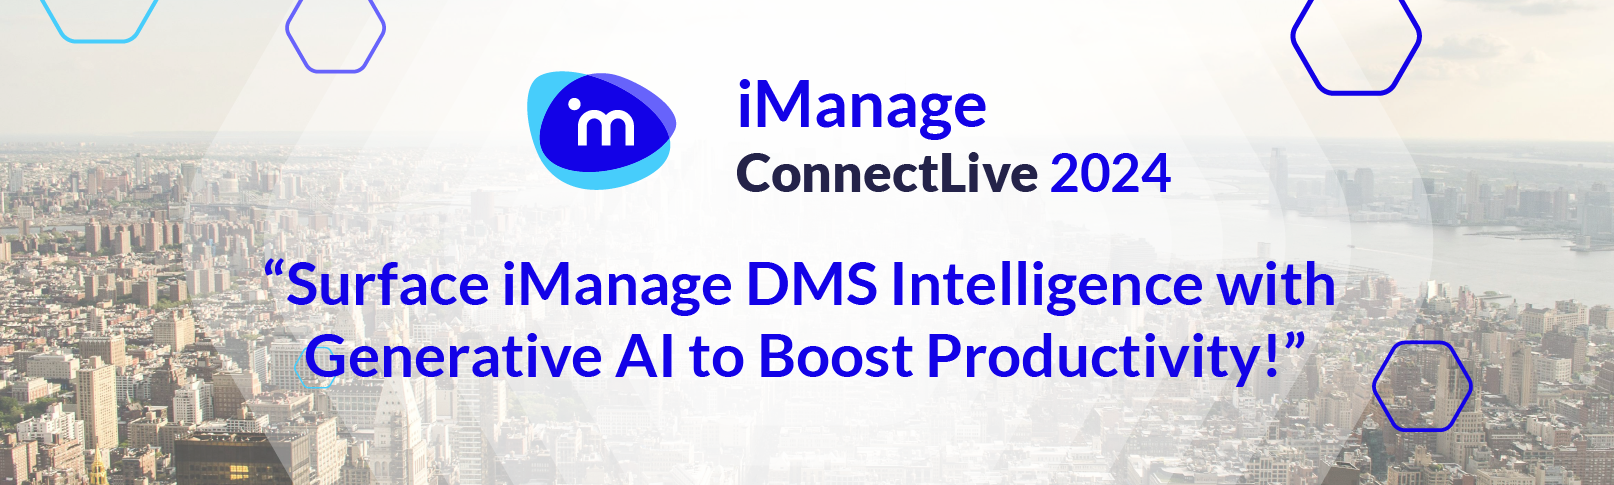 imanage-connectLive-Small